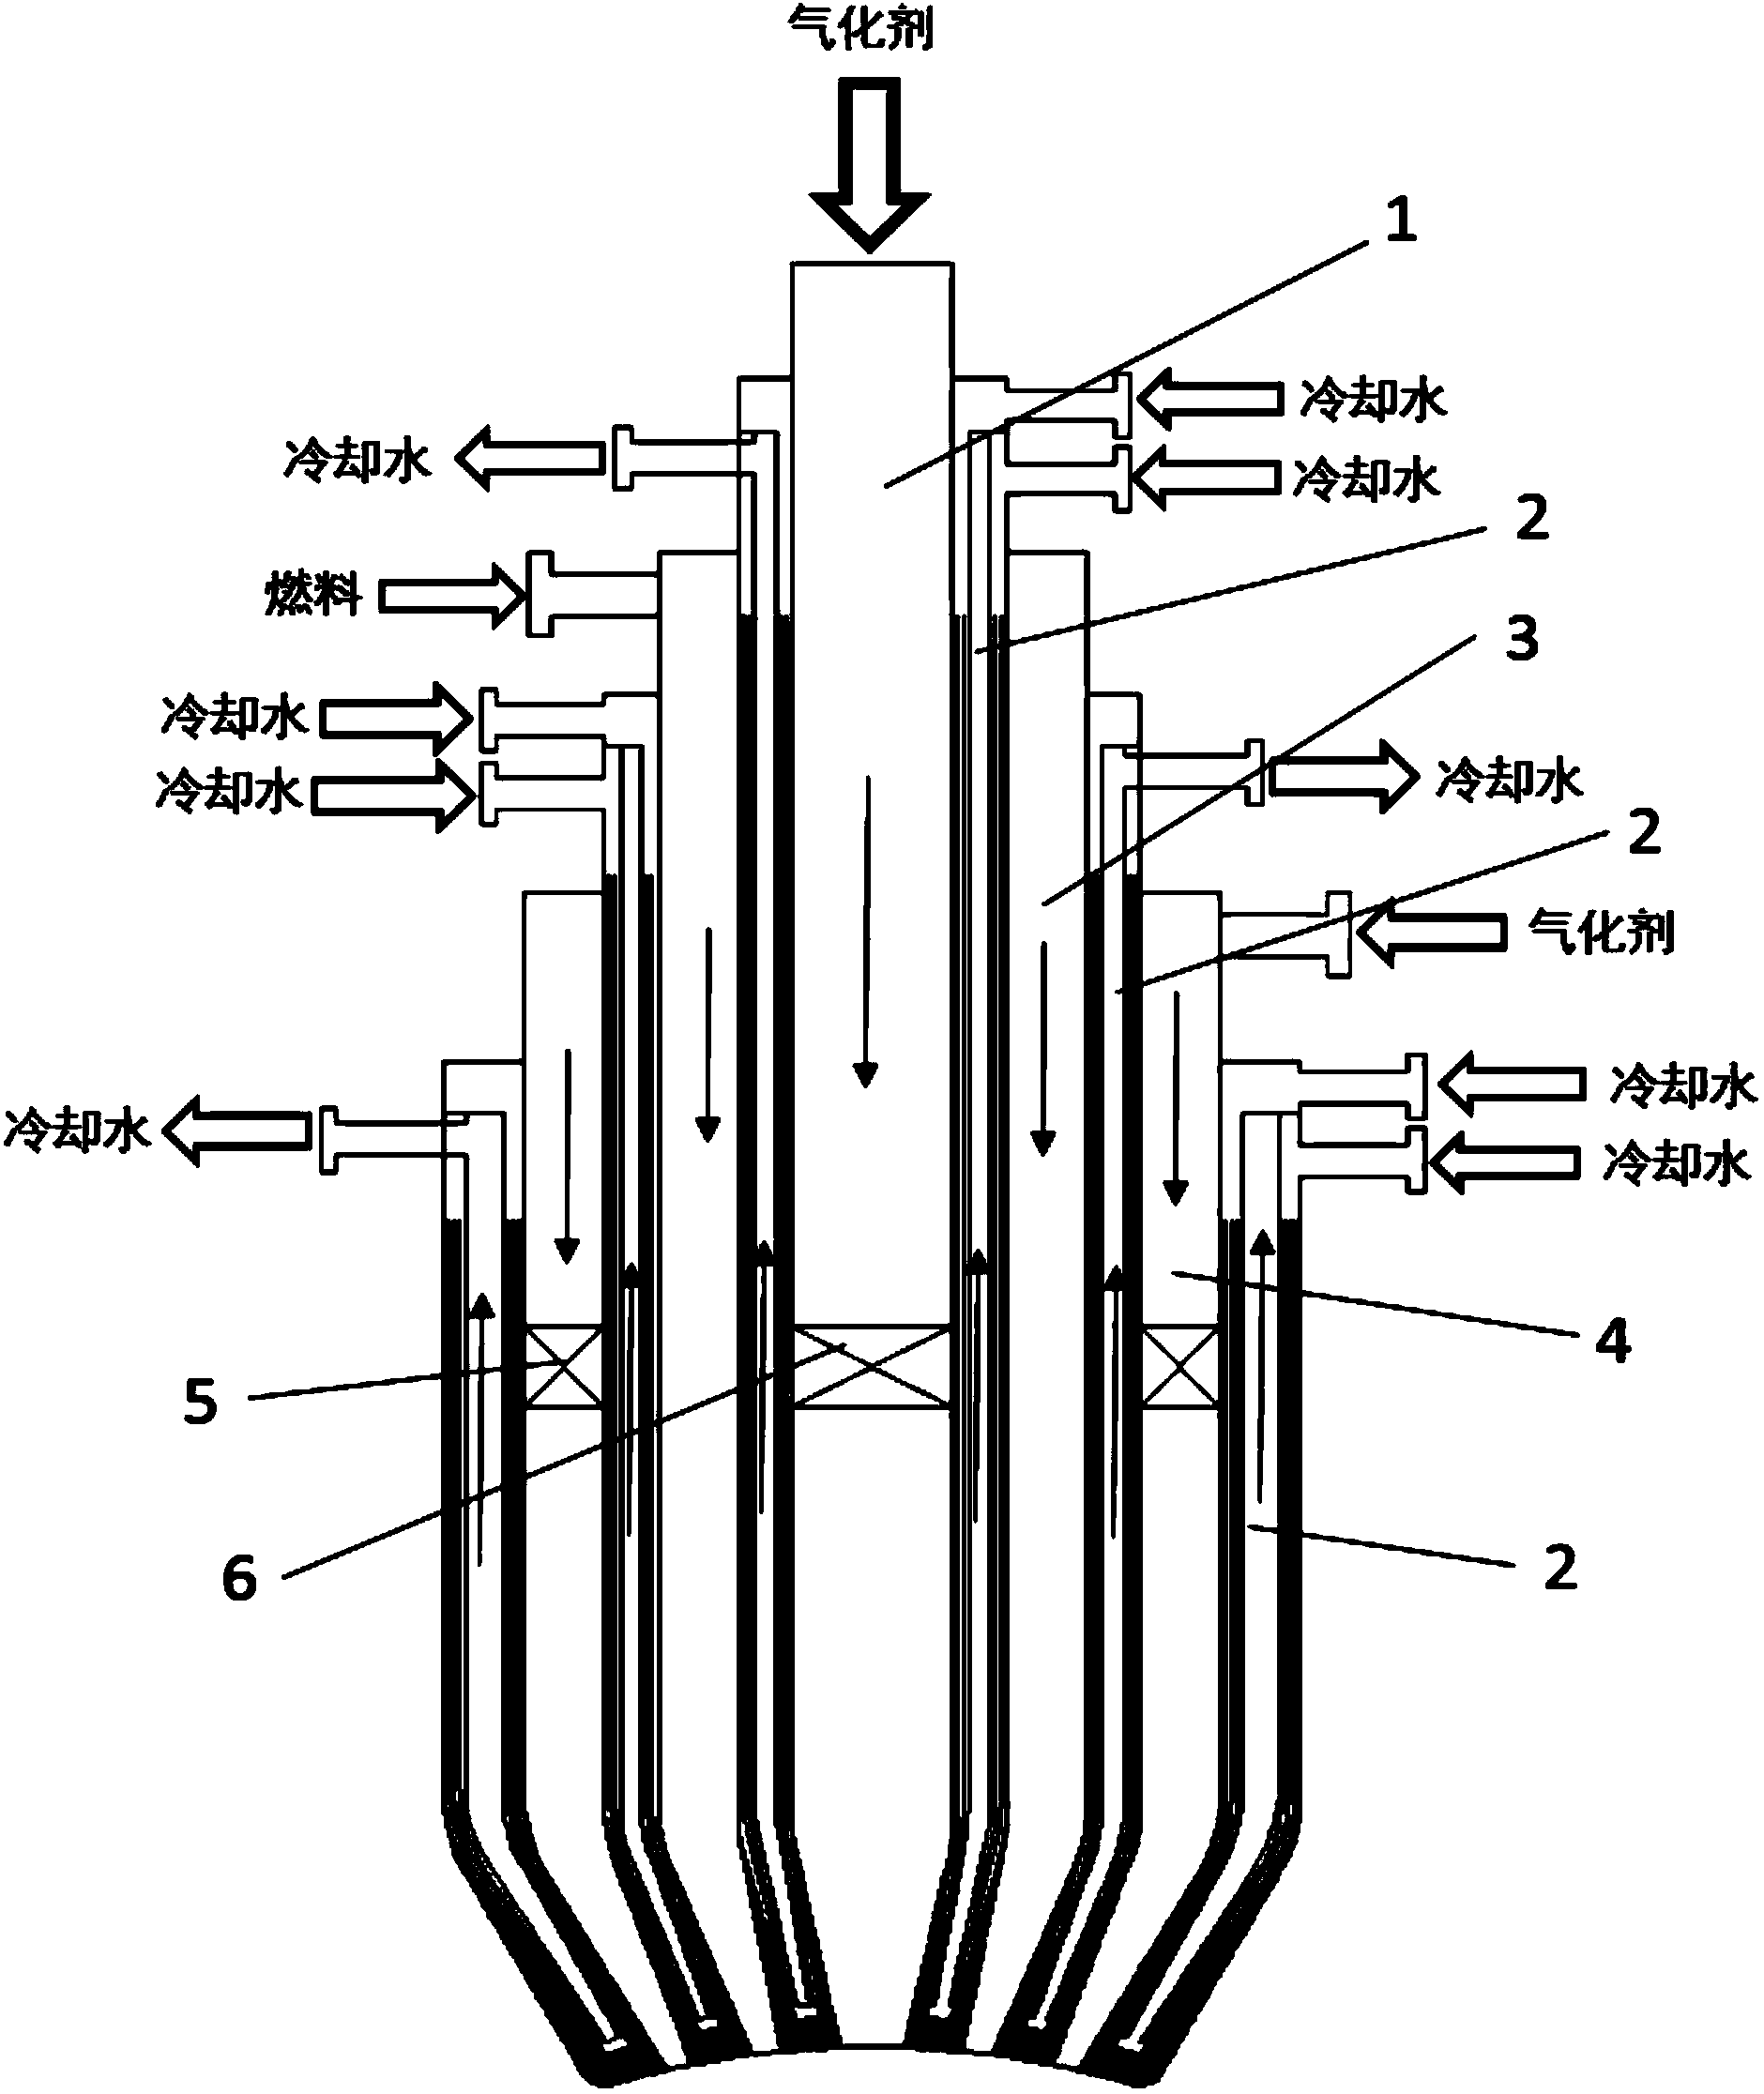 Novel micro-channel circularly cooling gasification process nozzle